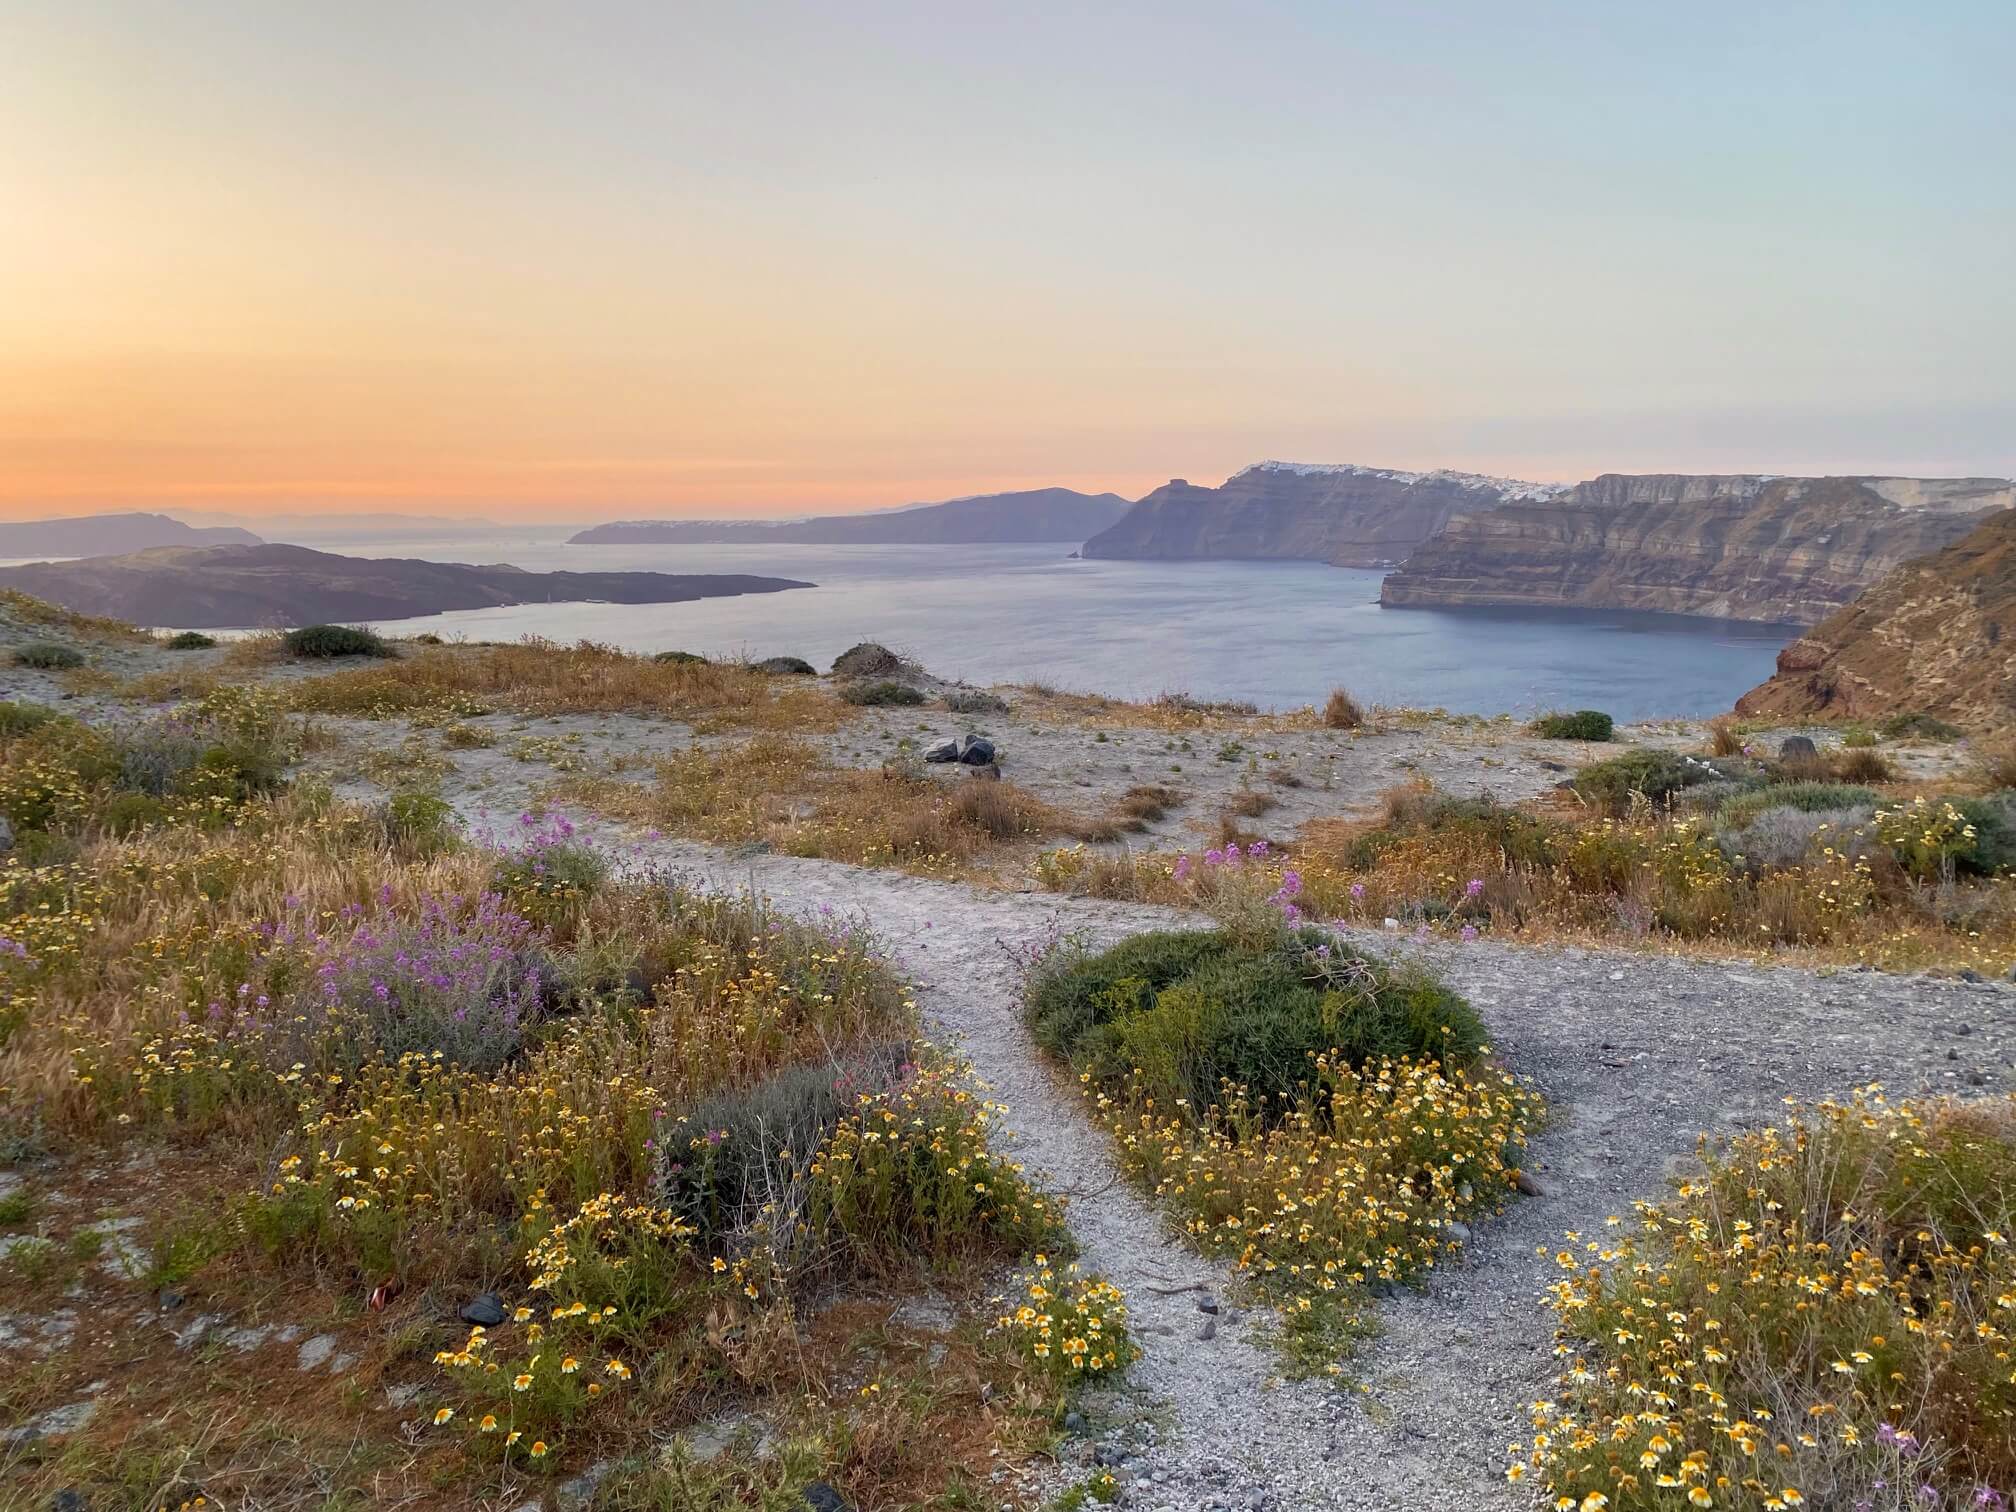 9 Hiking Trails to Discover Santorini